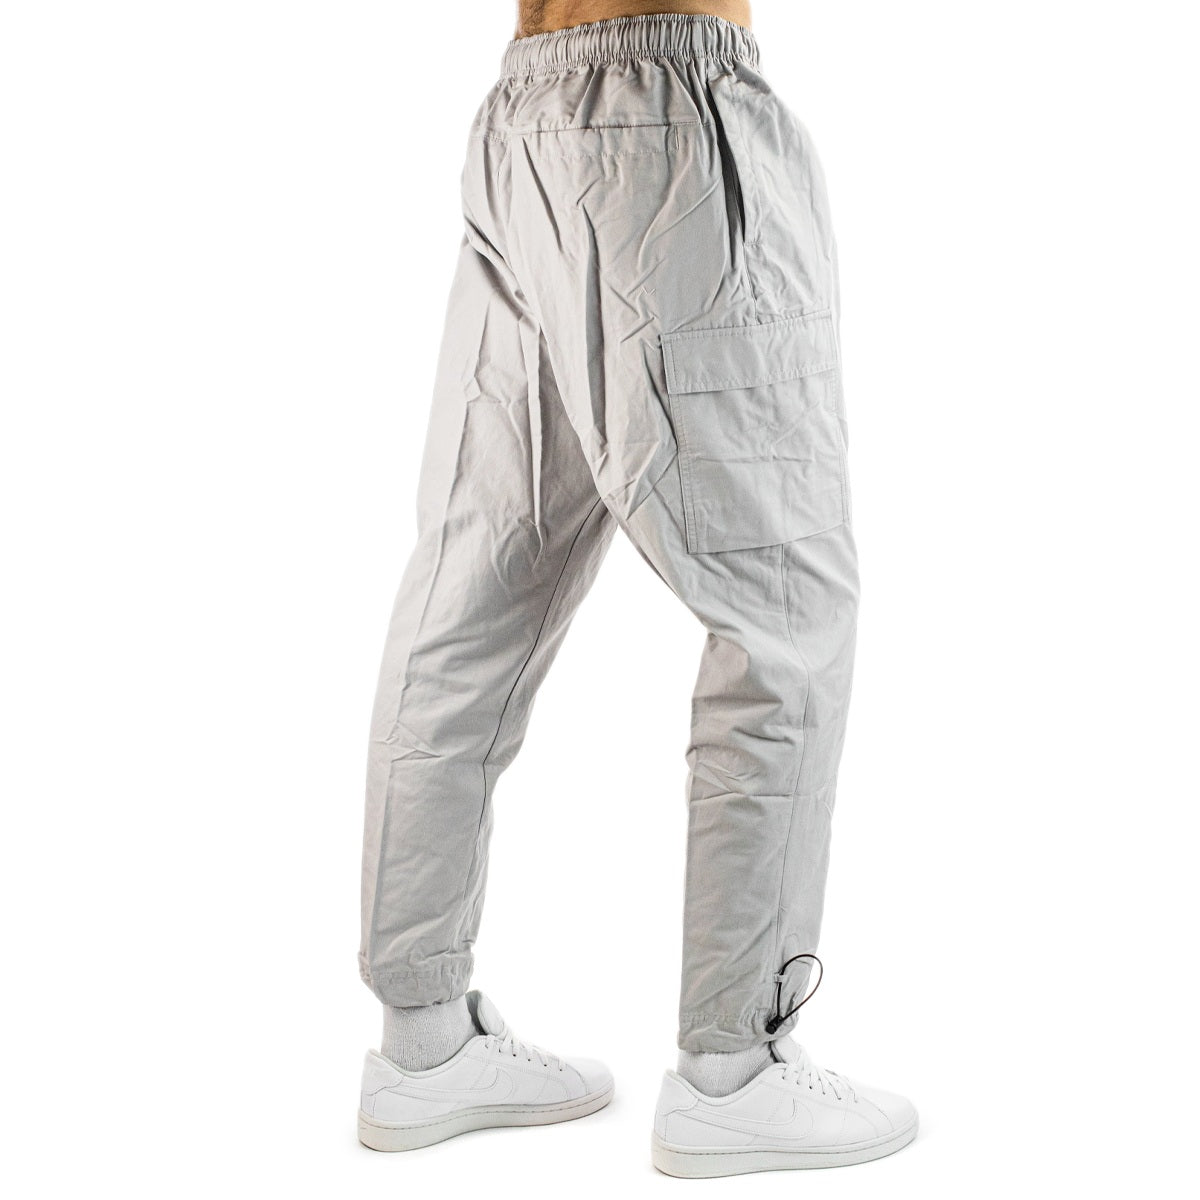 Nike Repeat SW Woven Pant Hose DX2033-012-